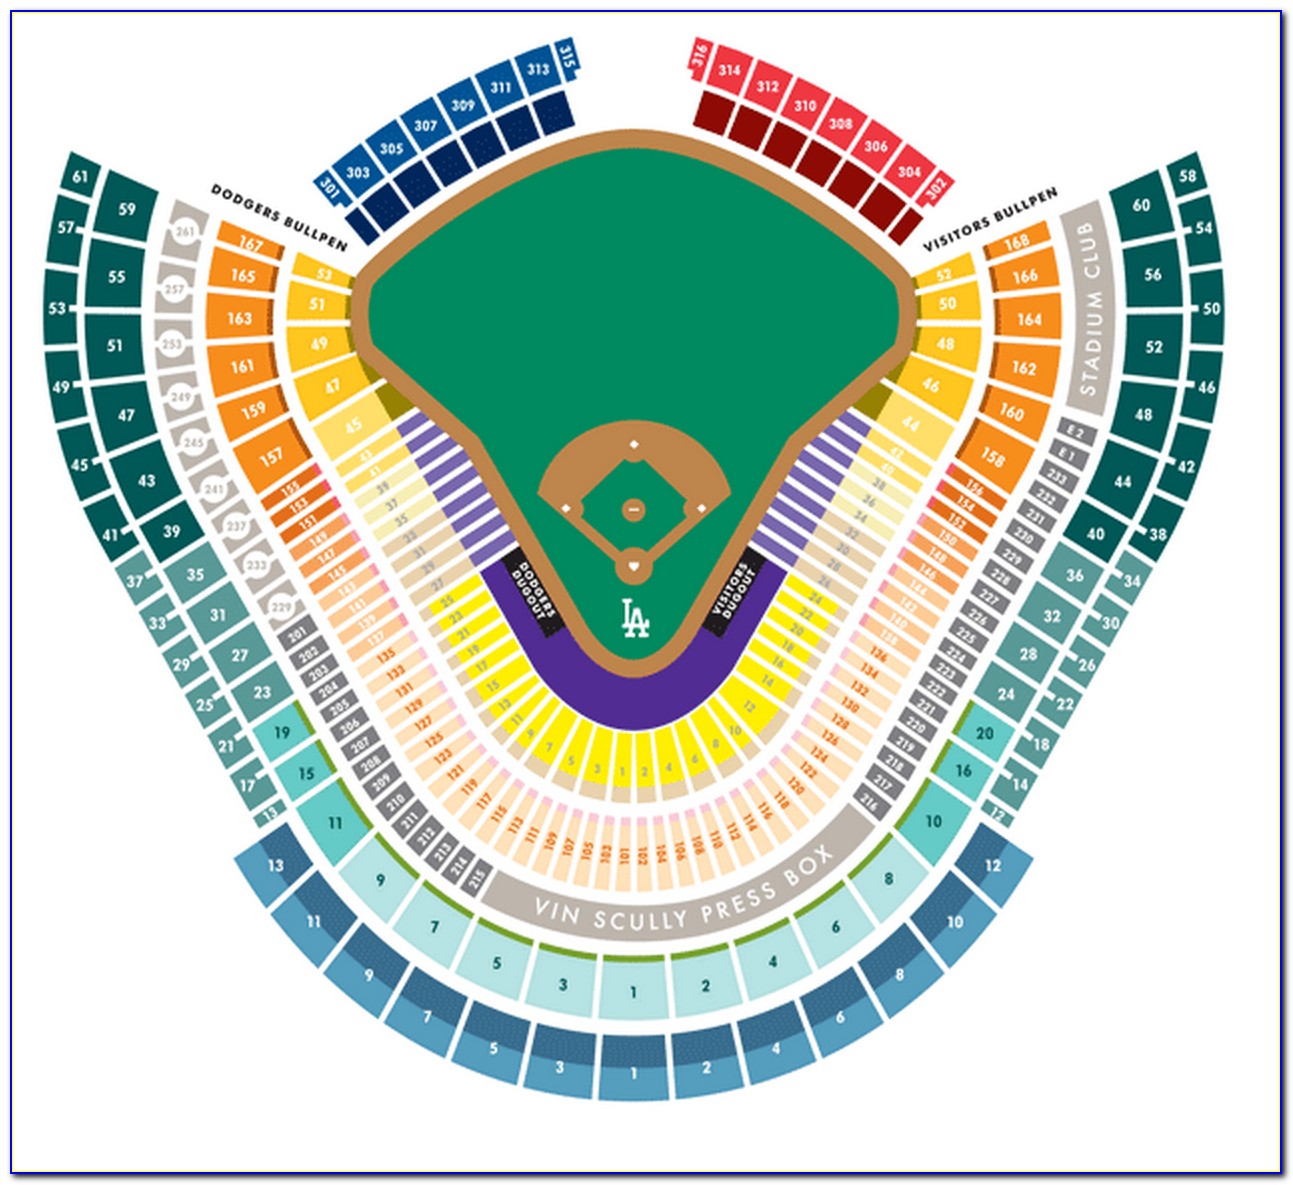 Dodgers Dugout Club Seat Map